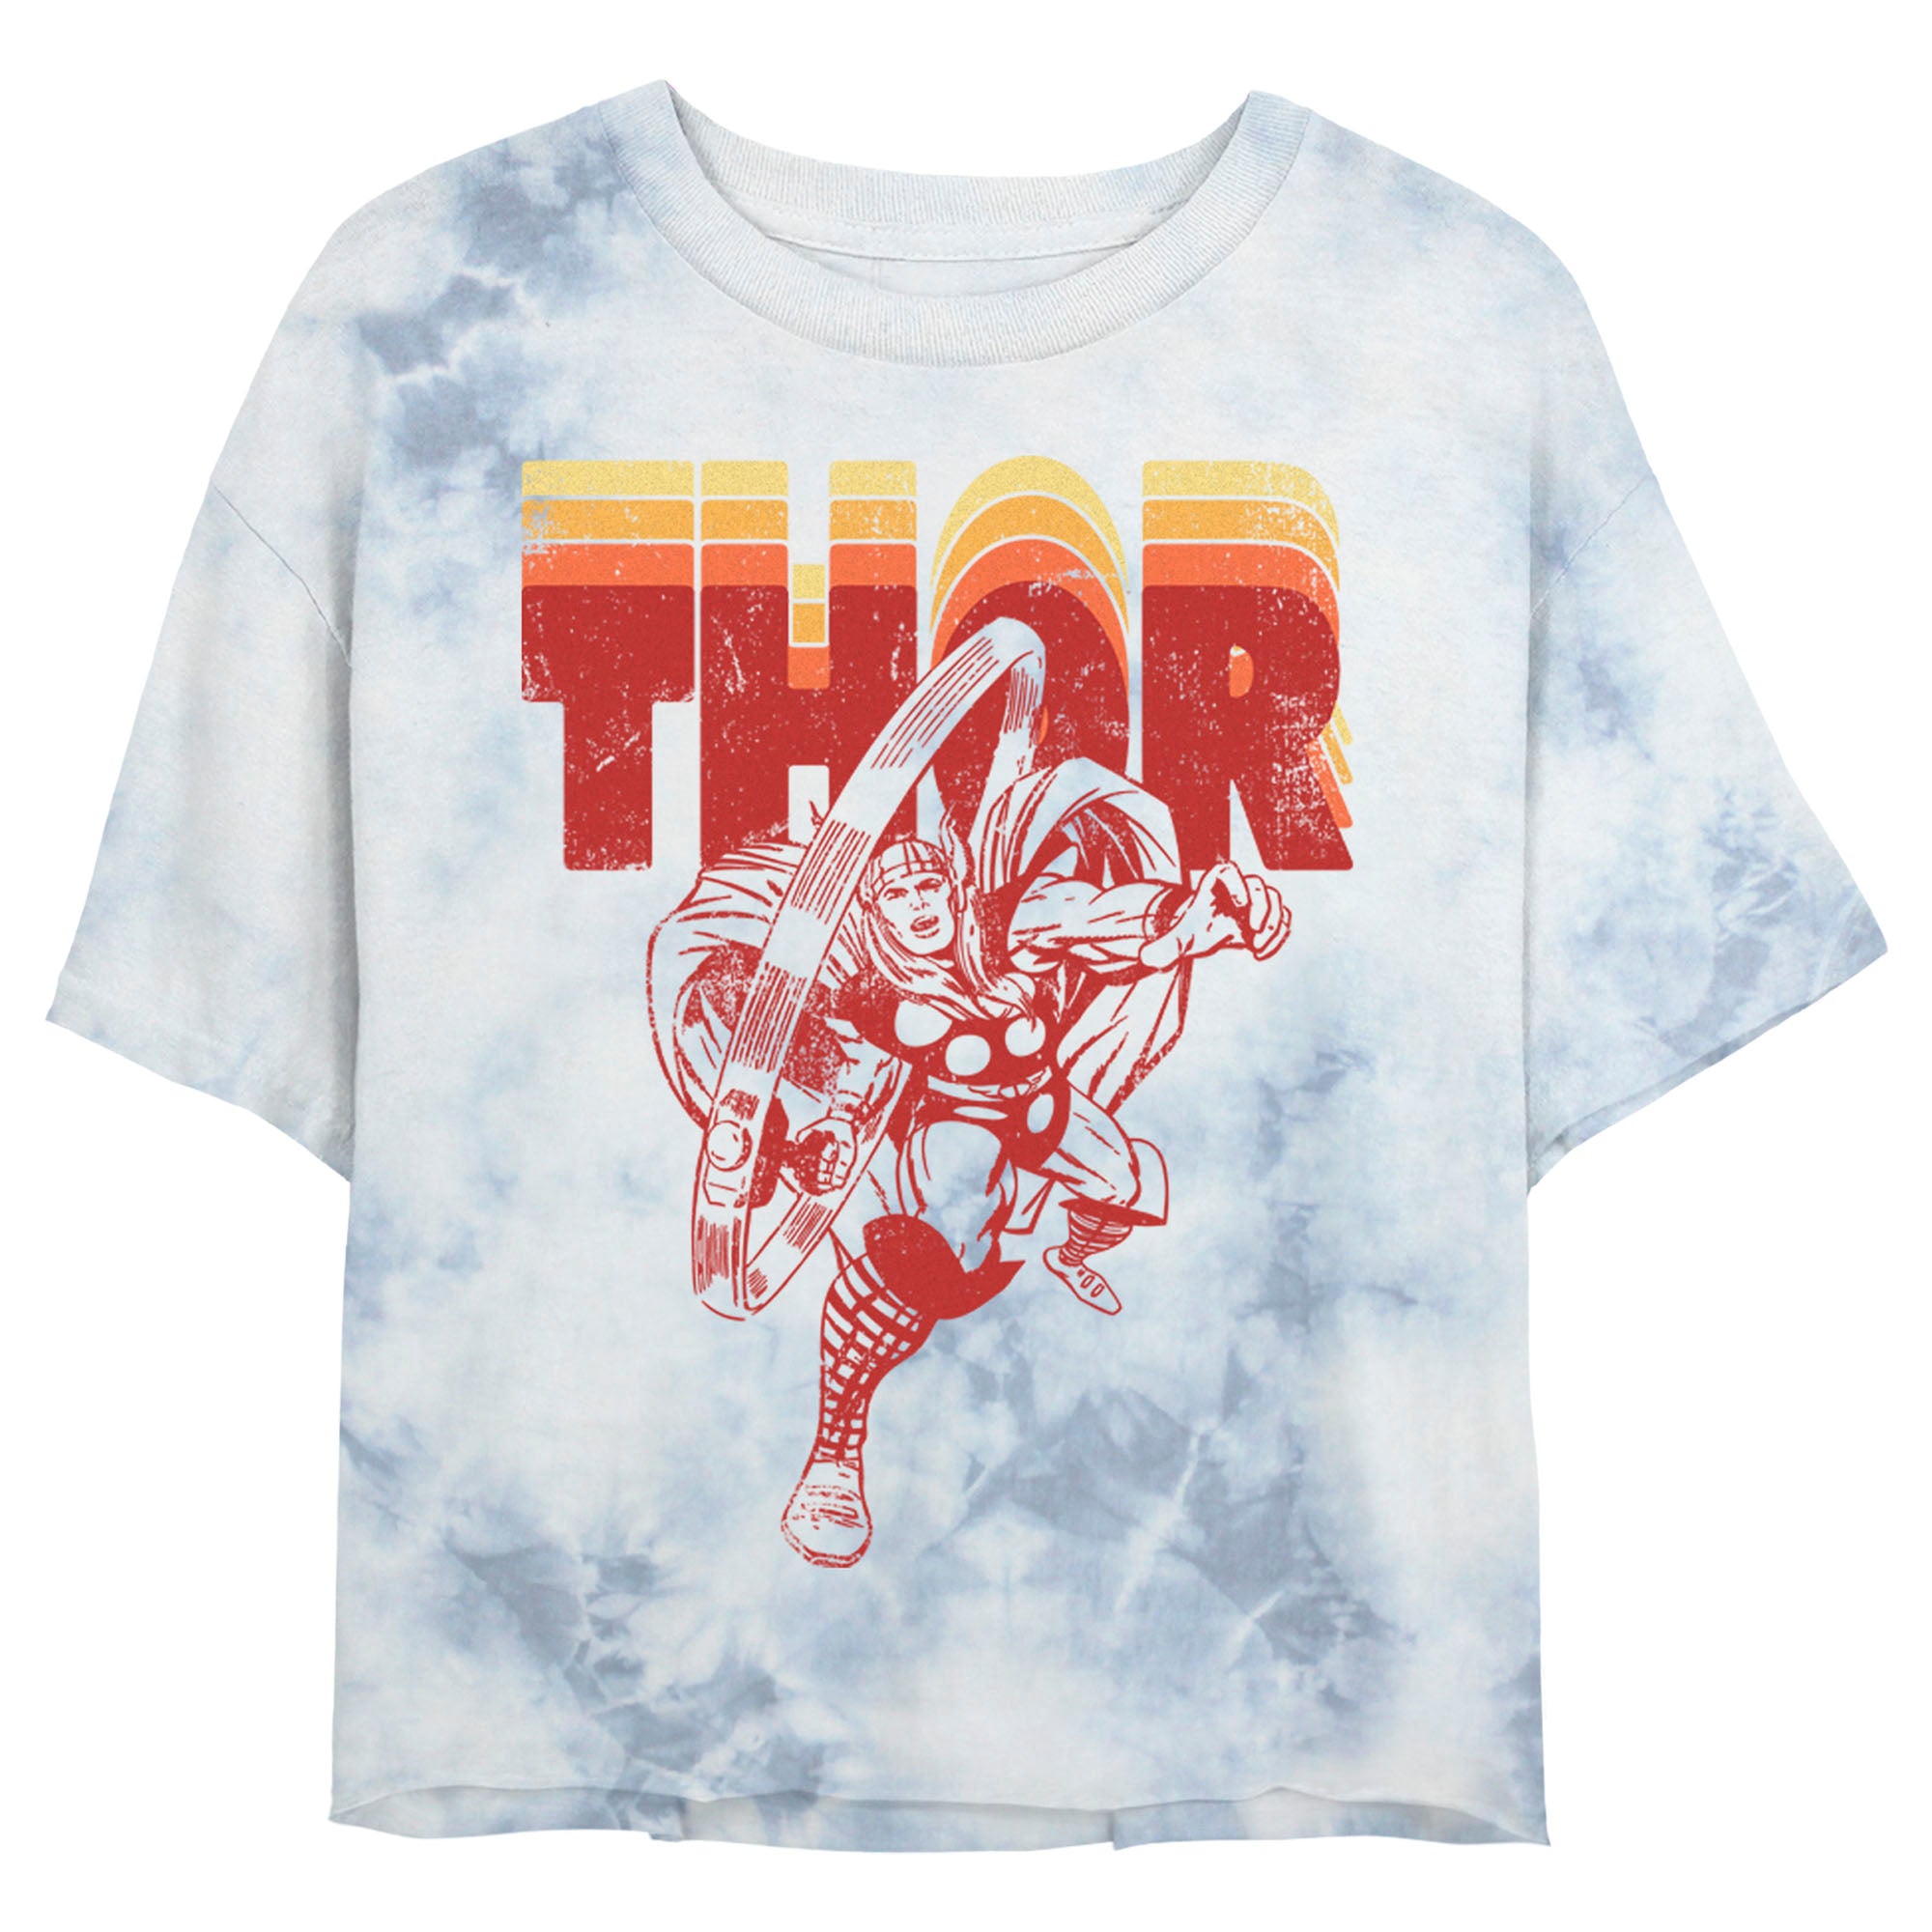 Join the Avengers: Line – Mouse Shop Today Our Kids The Box Marvel Merch Apparel